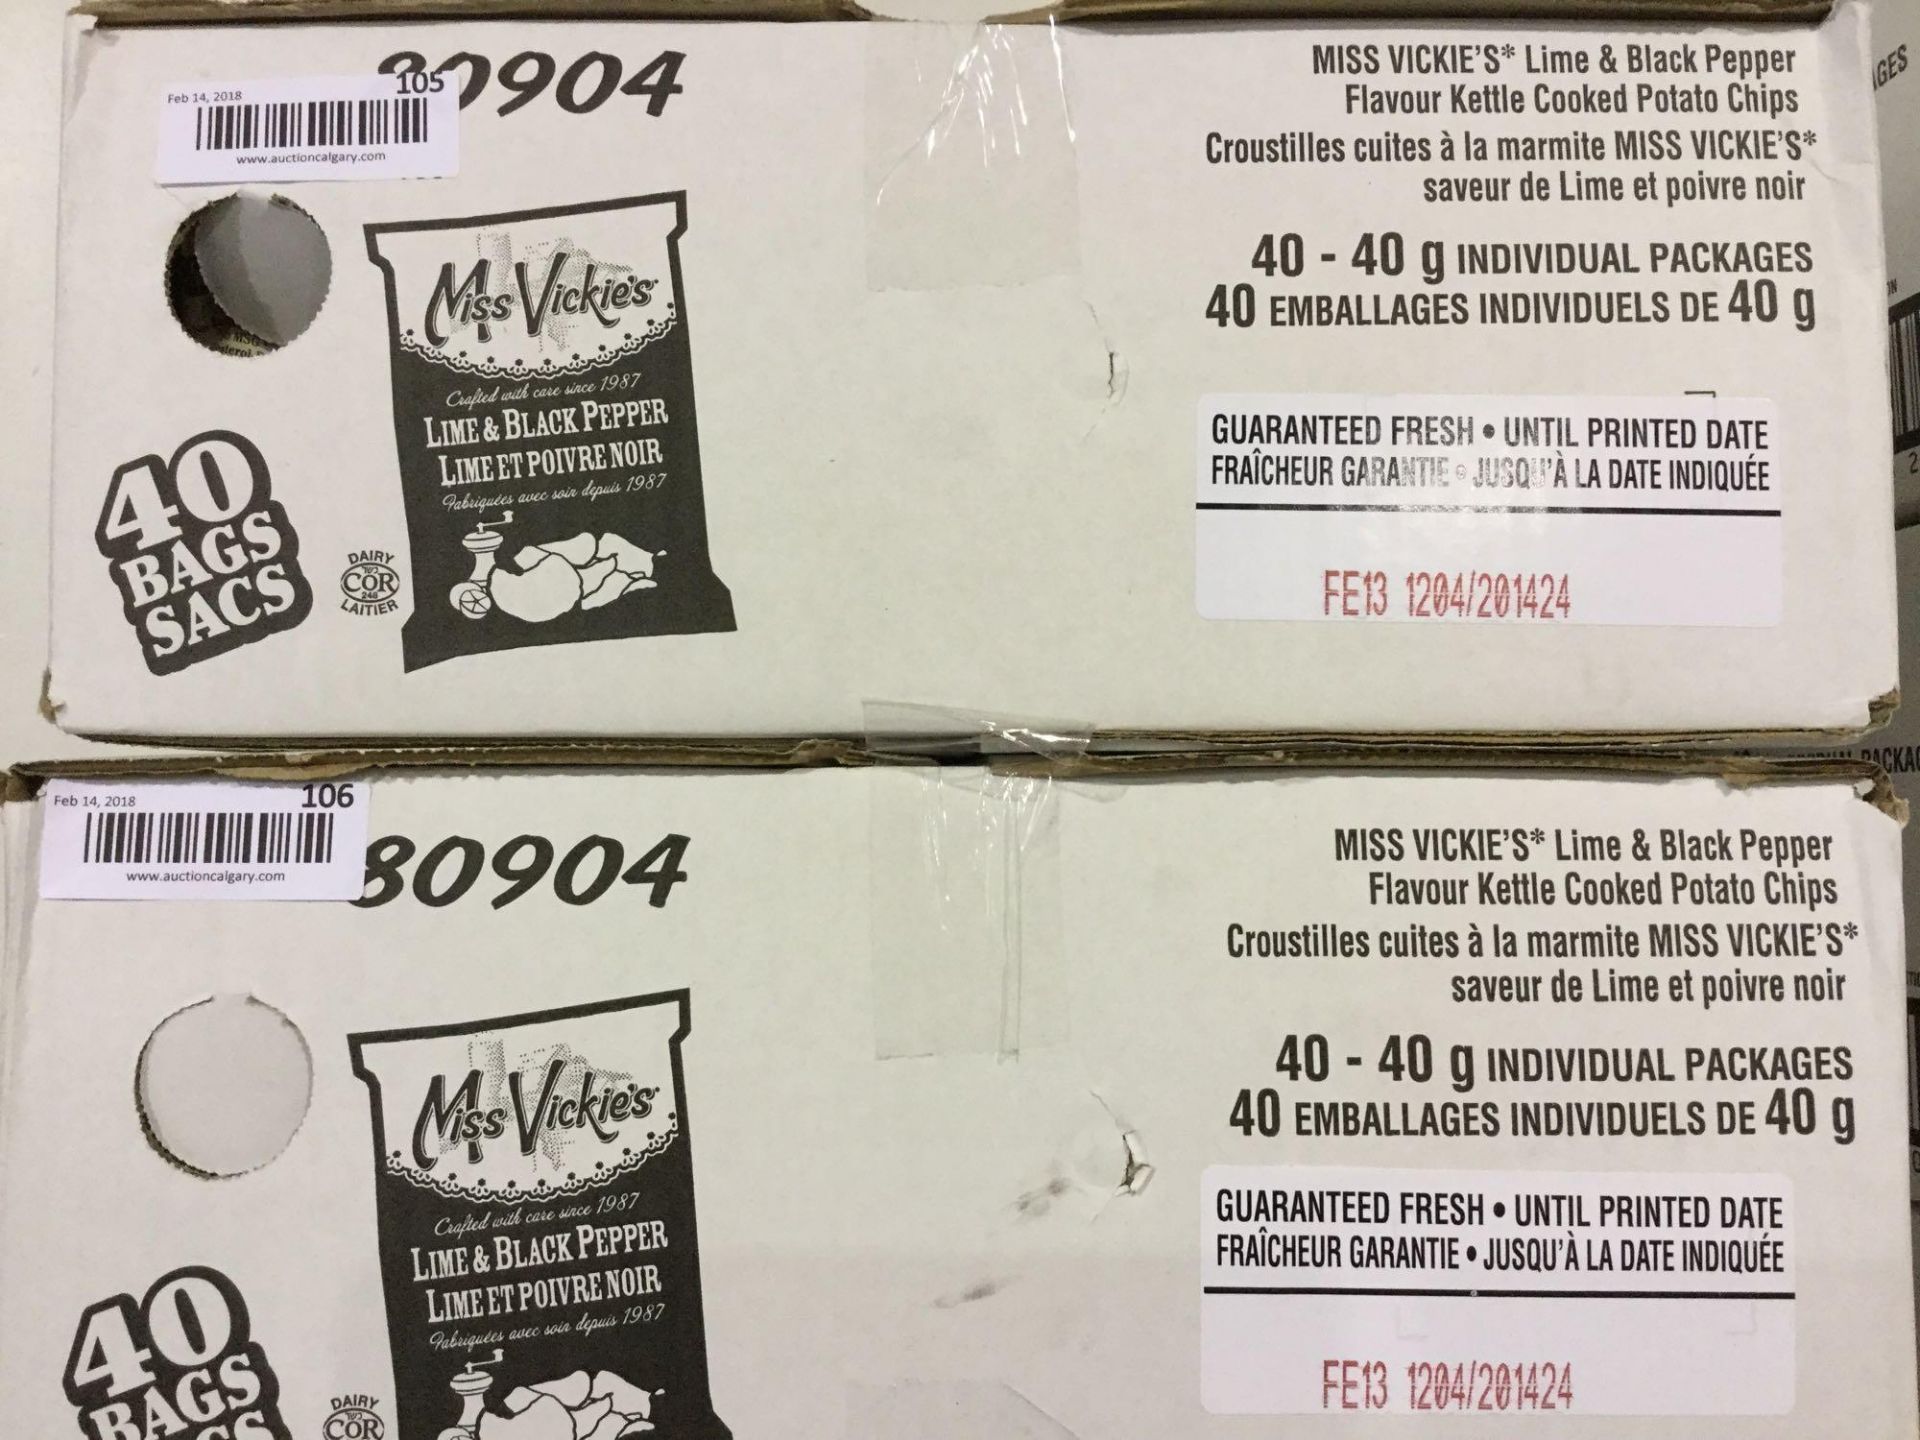 Case of 40 x 40 g Miss Vickies Lime and Black Pepper Chips